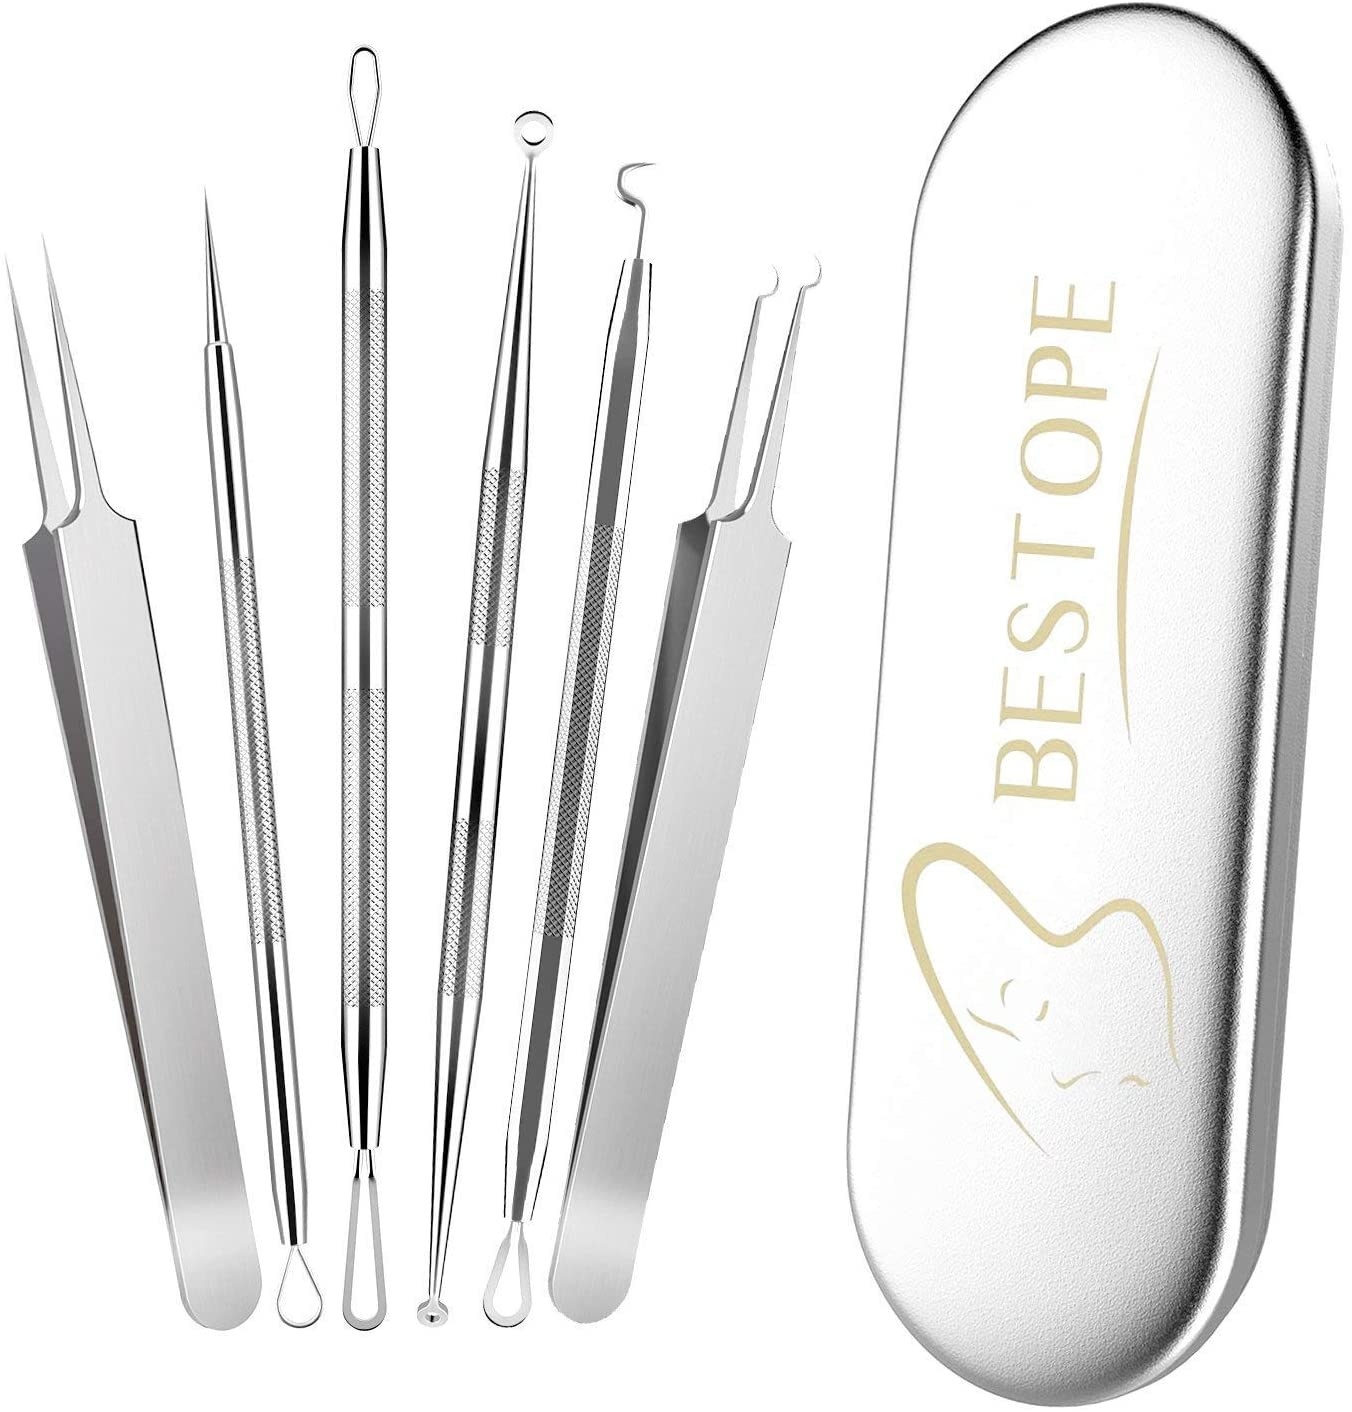 A set of tools for extracting blackheads